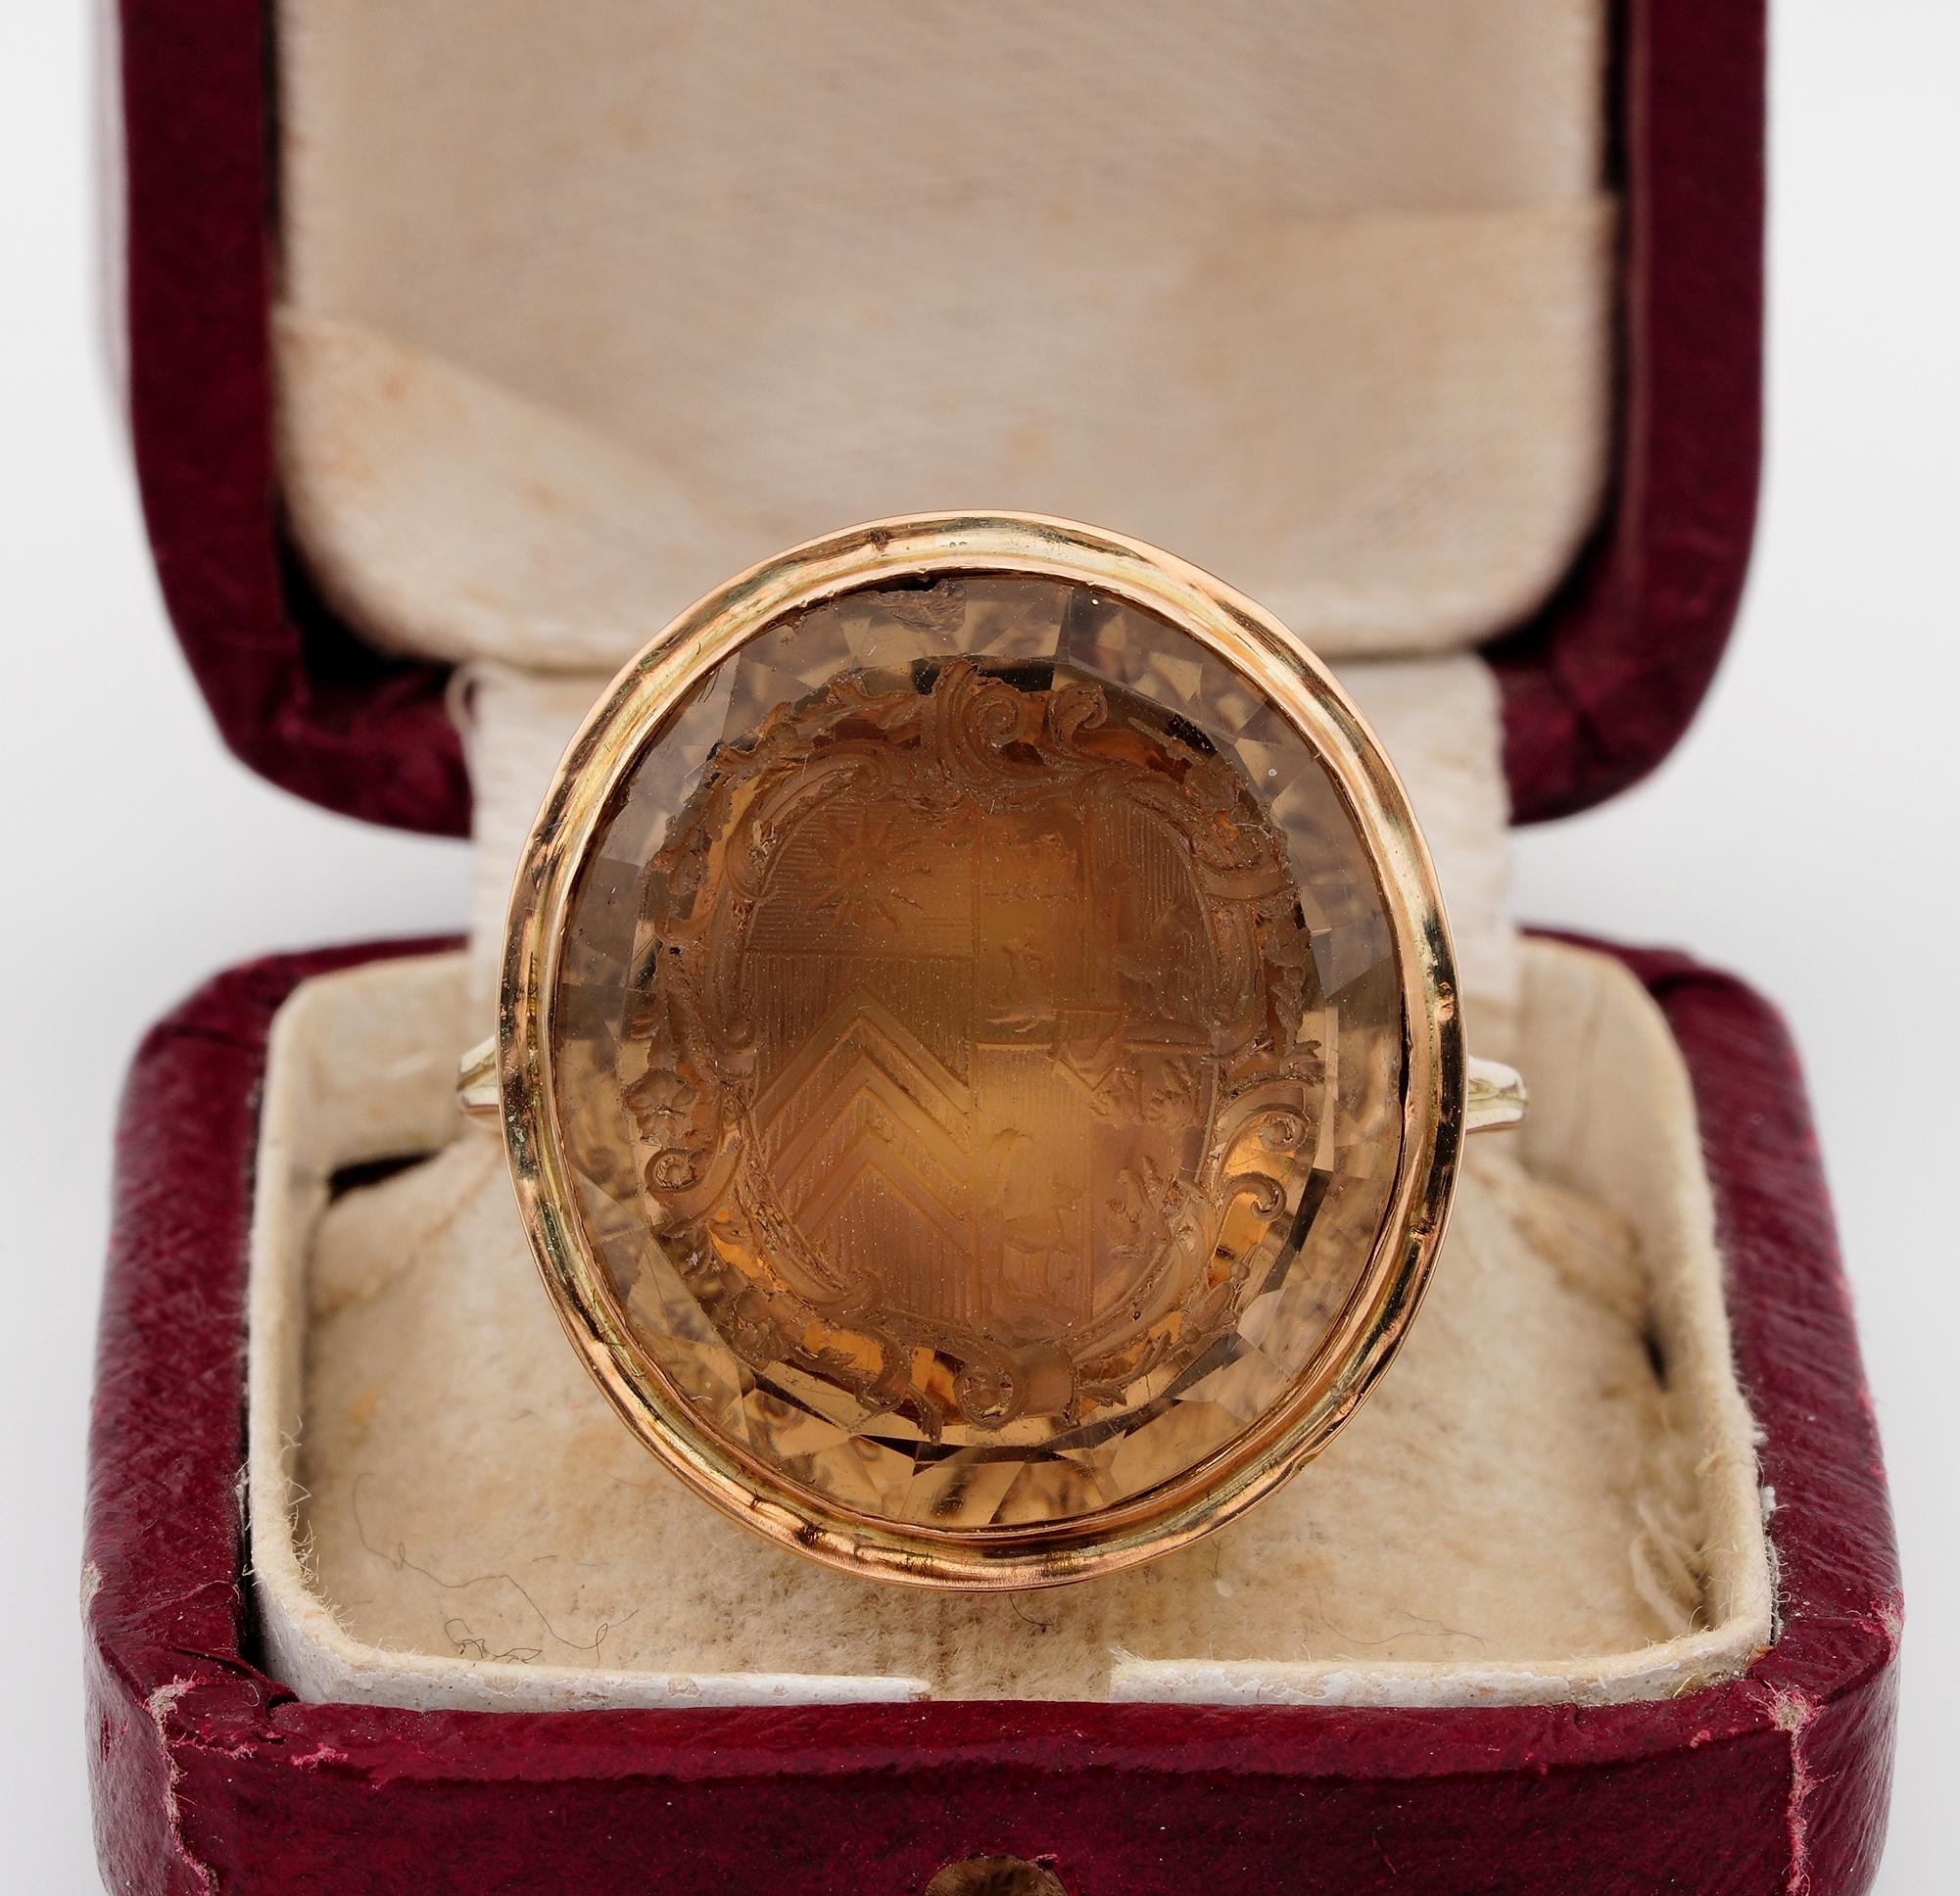 Georgian Signature
Large antique Georgian period Citrine intaglio seal ring, 1790/1800 ca
hand crafted of solid 18 KT gold
Close back set with a large natural Citrine of approx 24.00 Ct – 21.15 x 18.91 mm. – intricately hand carved Coat of Arms